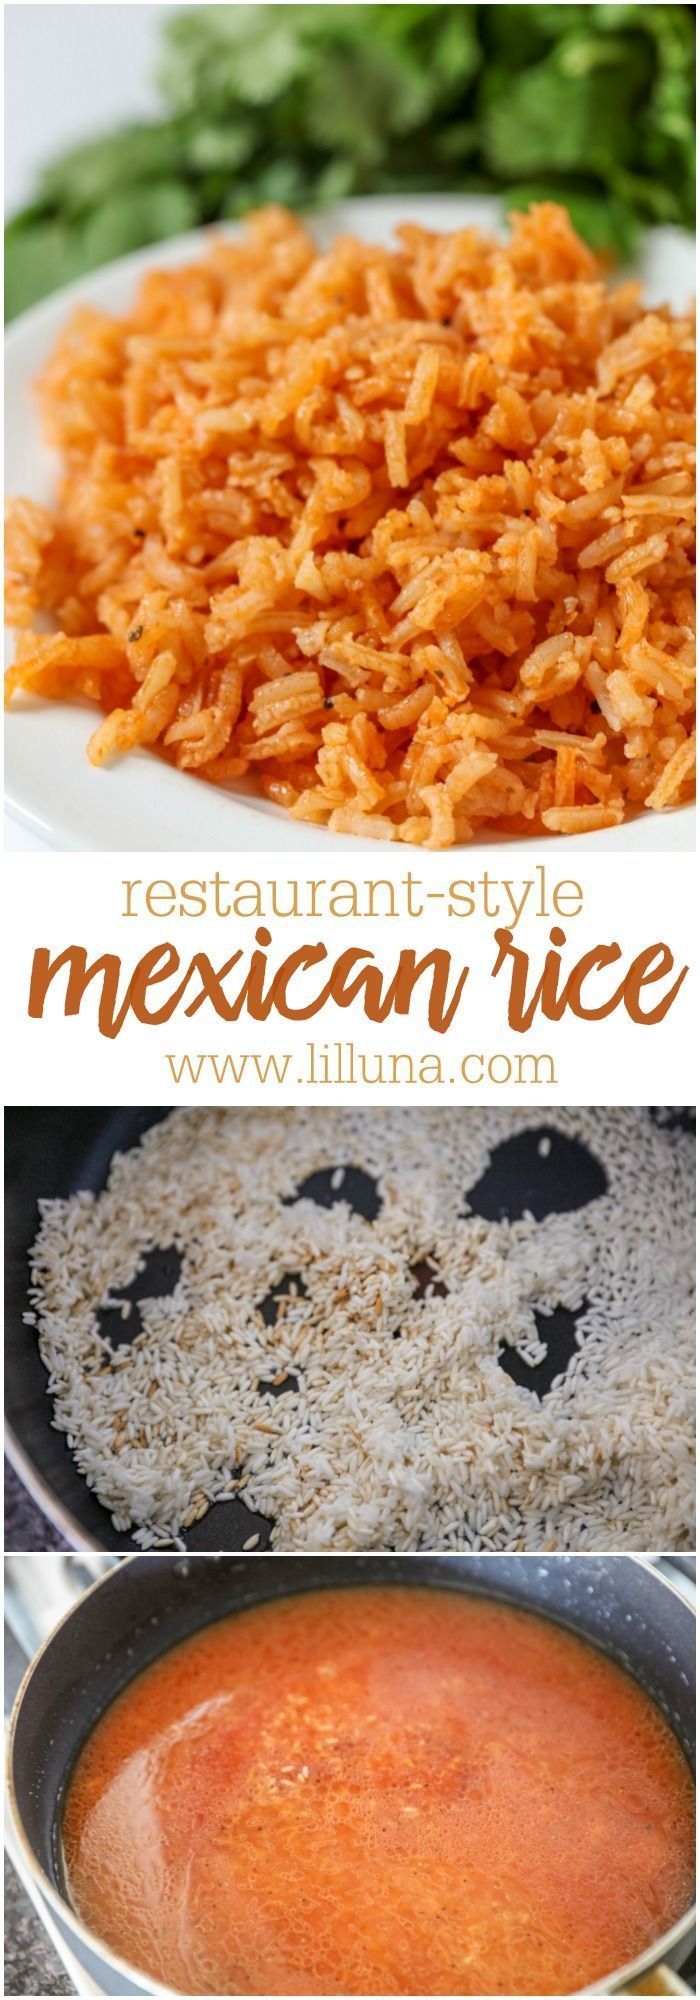 Restaurant-Style Mexican Rice – it is one of the easiest and most delicious recipes youll try!! Our whole family loves it!